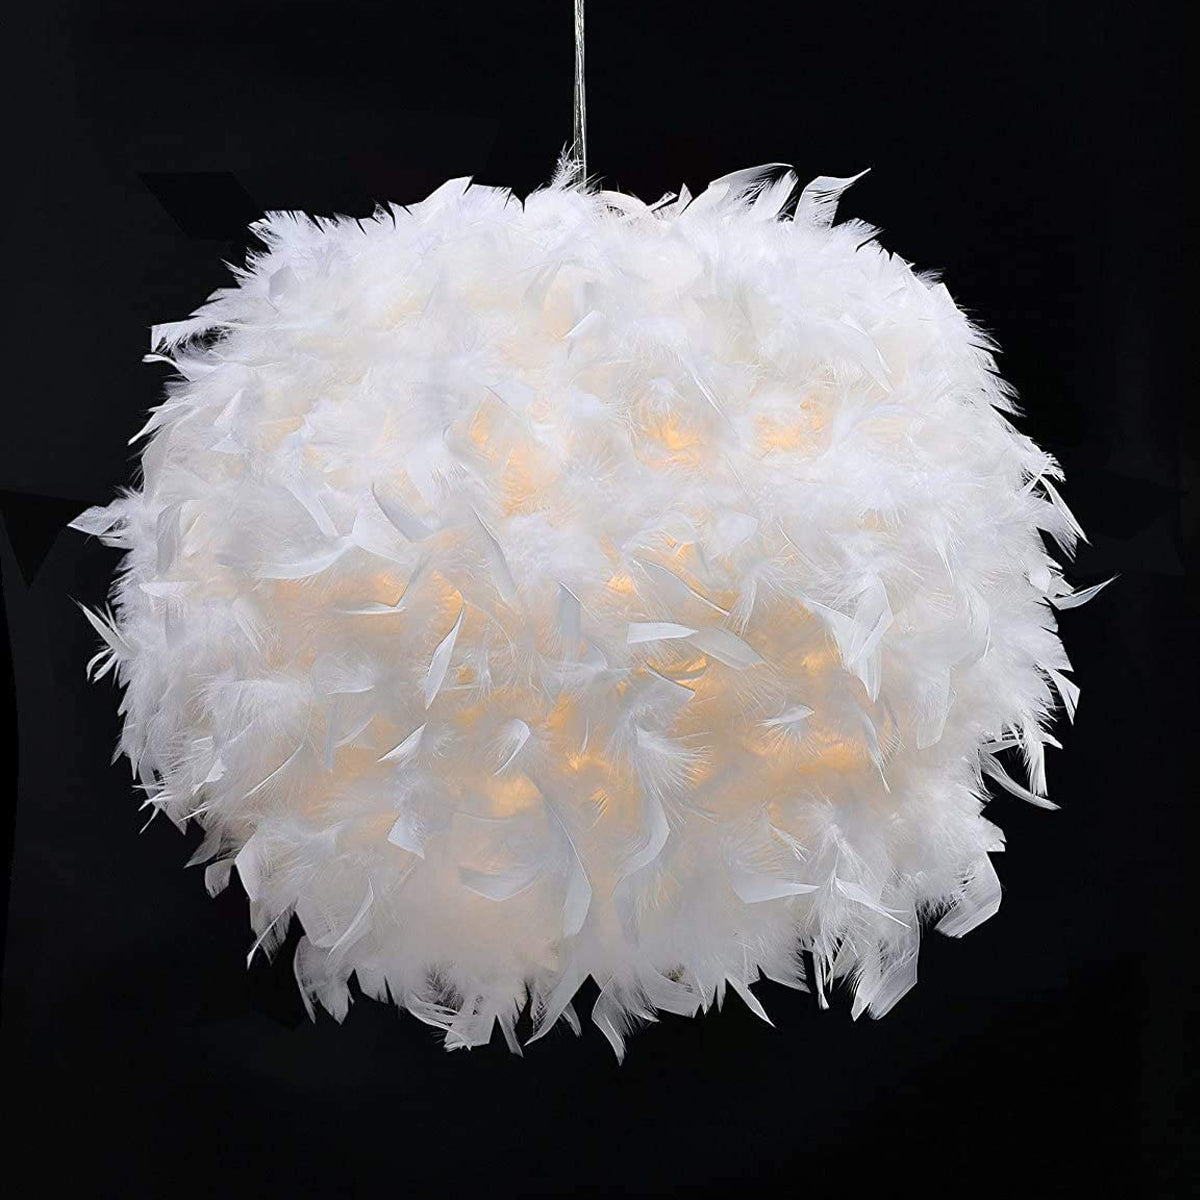 Our Rio easy fit white feather lamp shade is constructed from delicate feathers in a large round shape. This beautiful shade is perfect for adding a touch of fun and elegance to your room. Can be used as either a table lamp shade or a ce